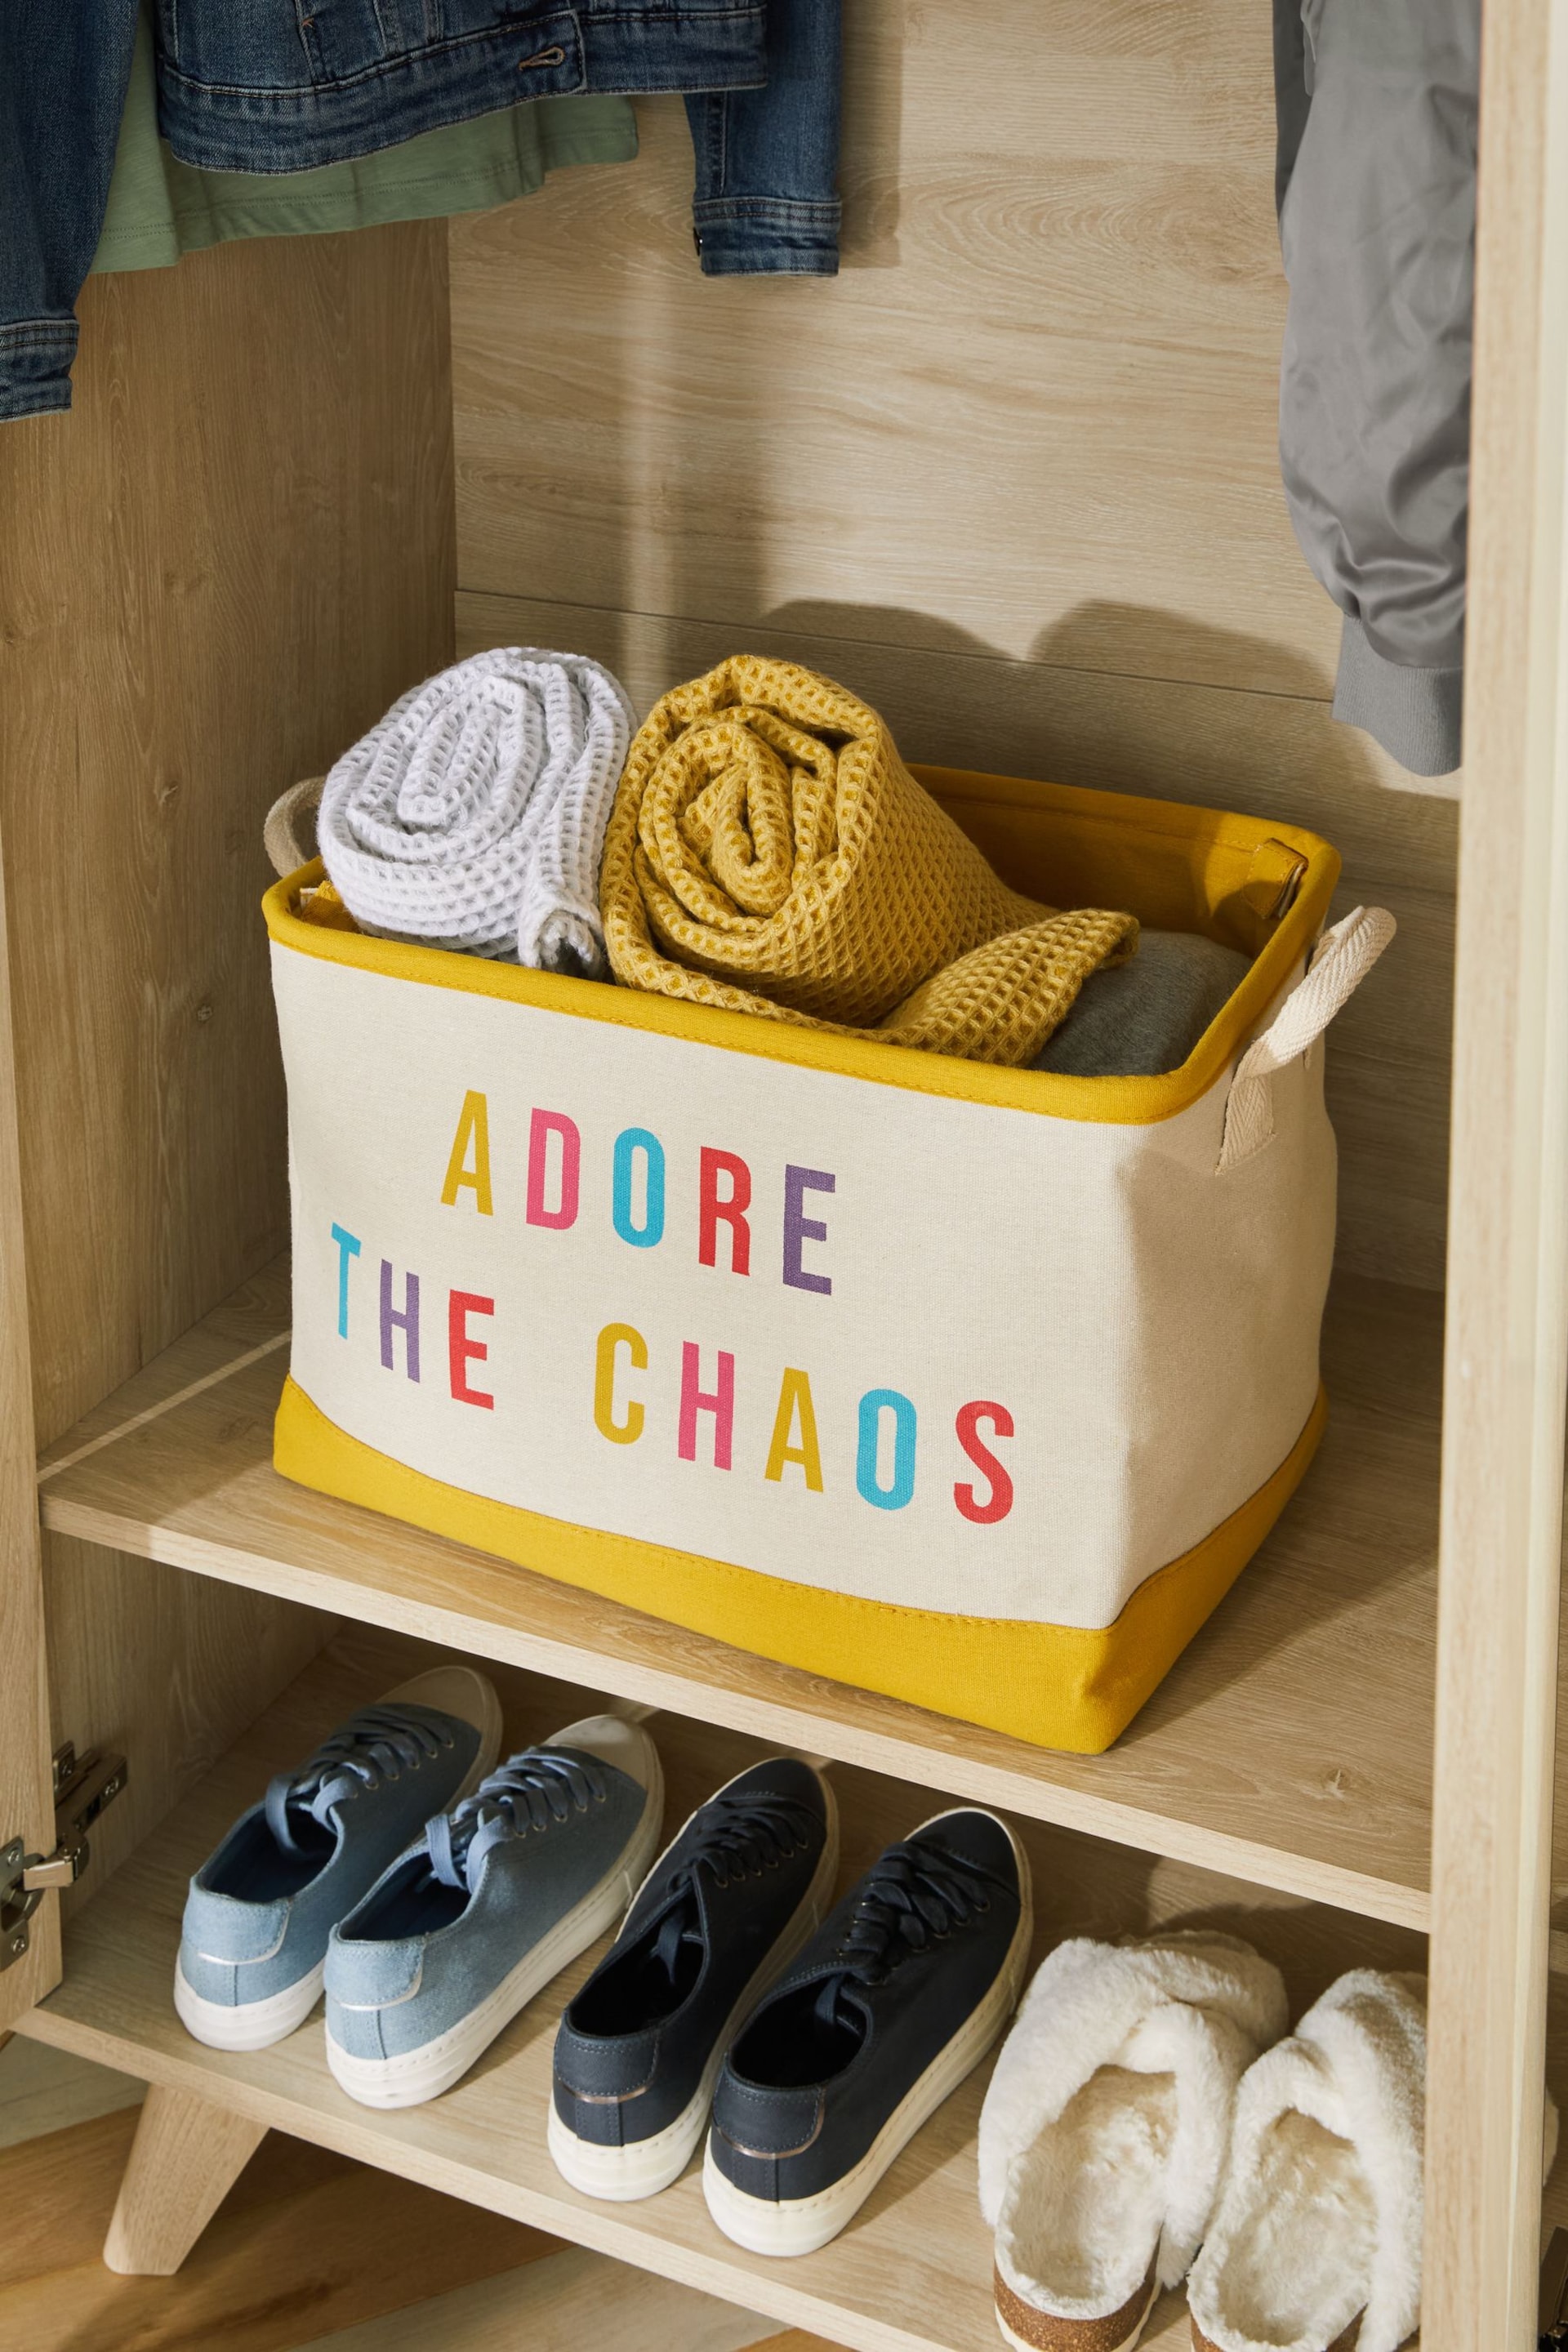 Multi Colour Adore the Chaos Fabric Storage Basket - Image 1 of 6